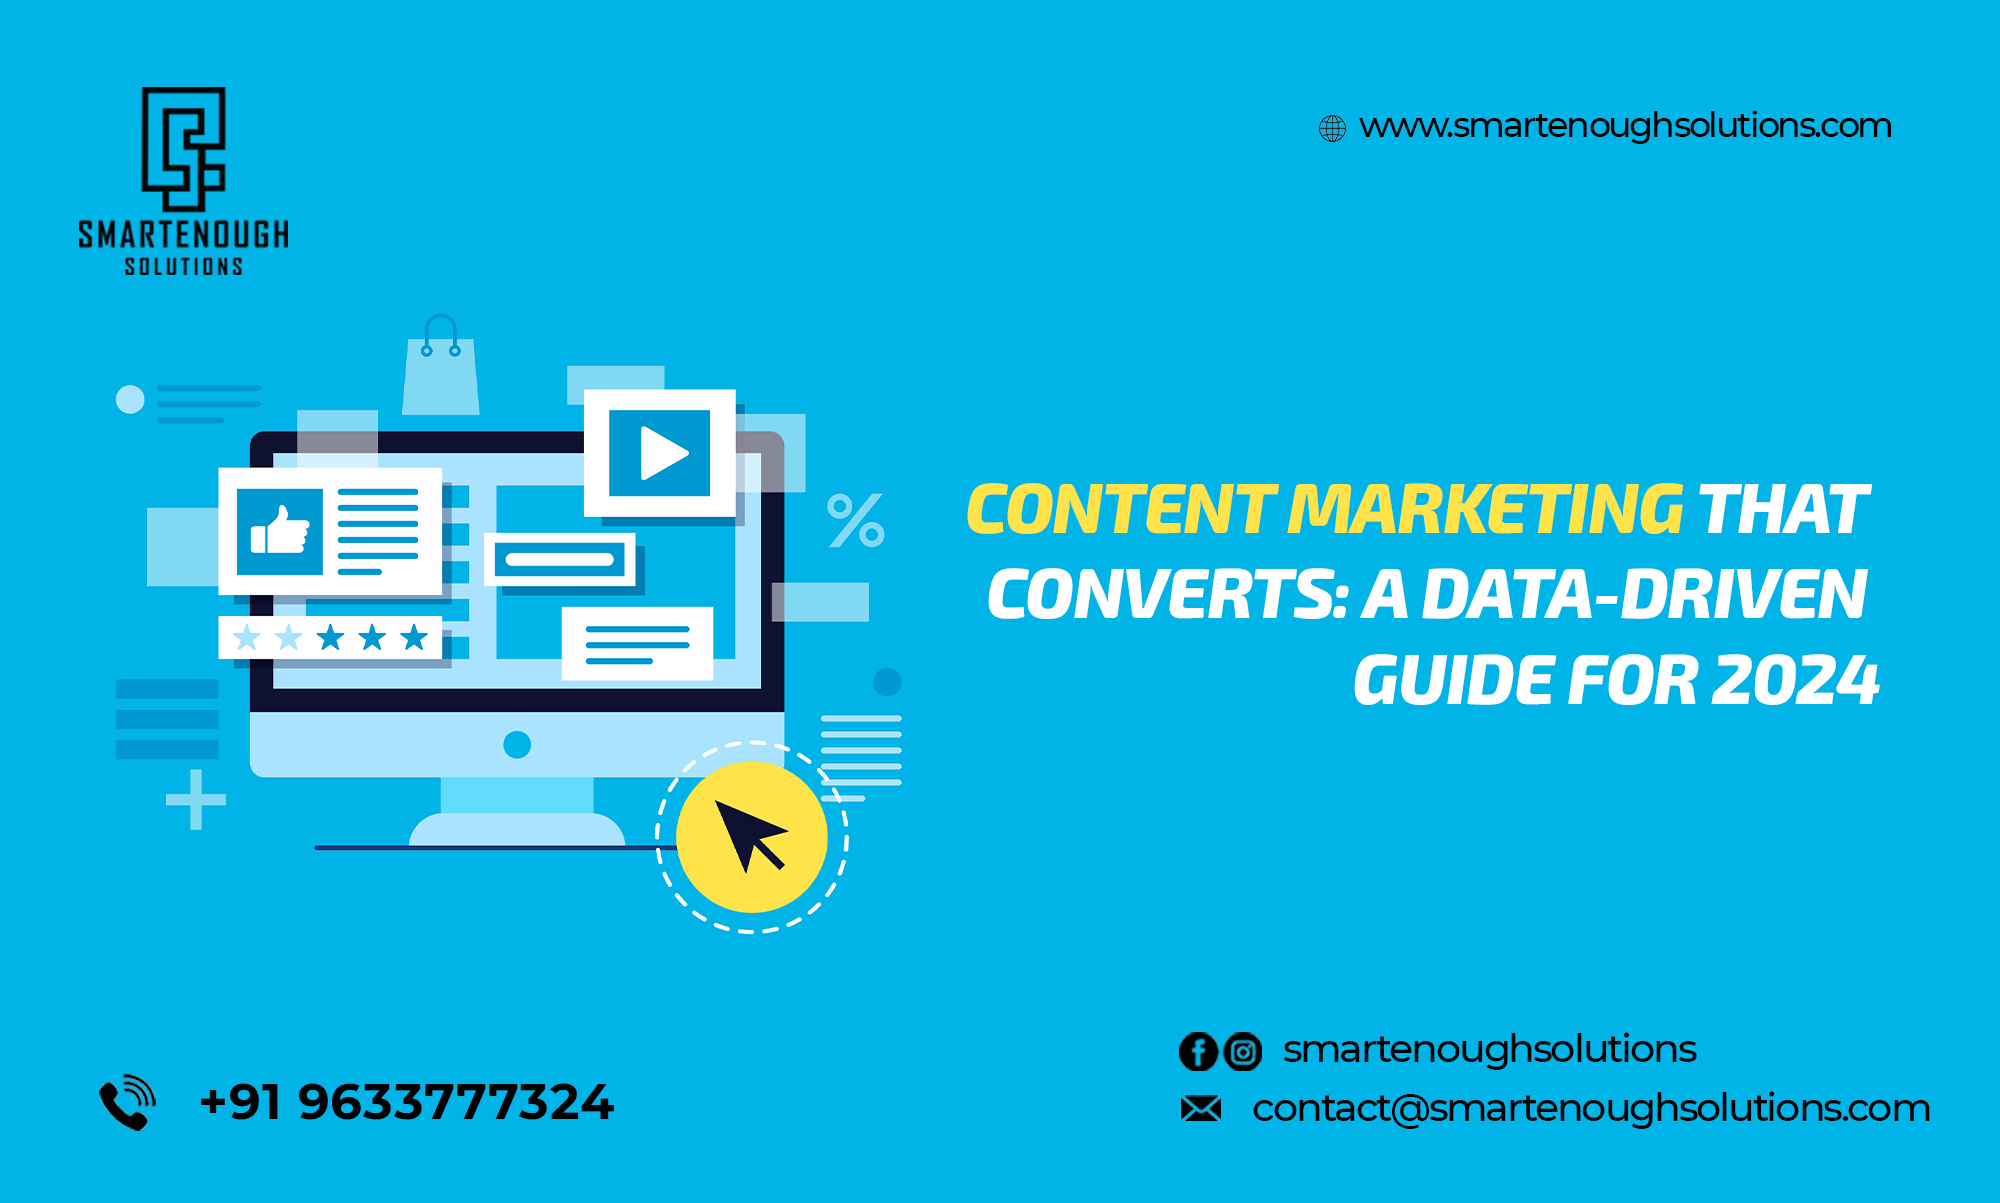 Content Marketing that Converts: A Data-Driven Guide for 2024